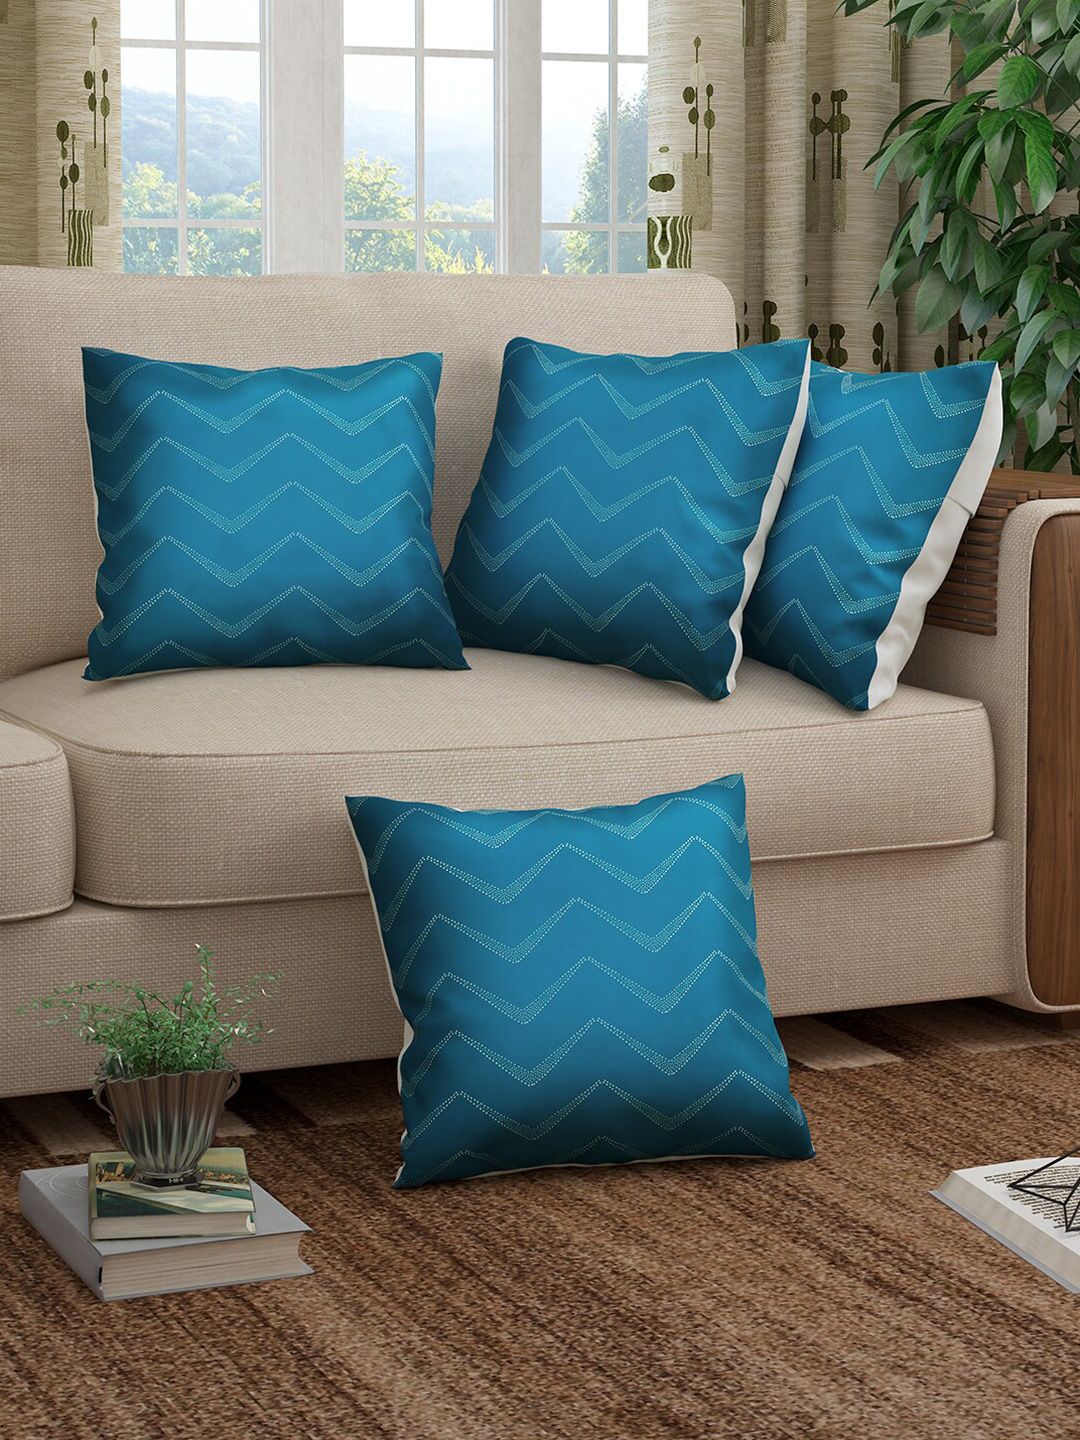 Story@home Blue & White Set of 4 Striped Square Cushion Covers Price in India